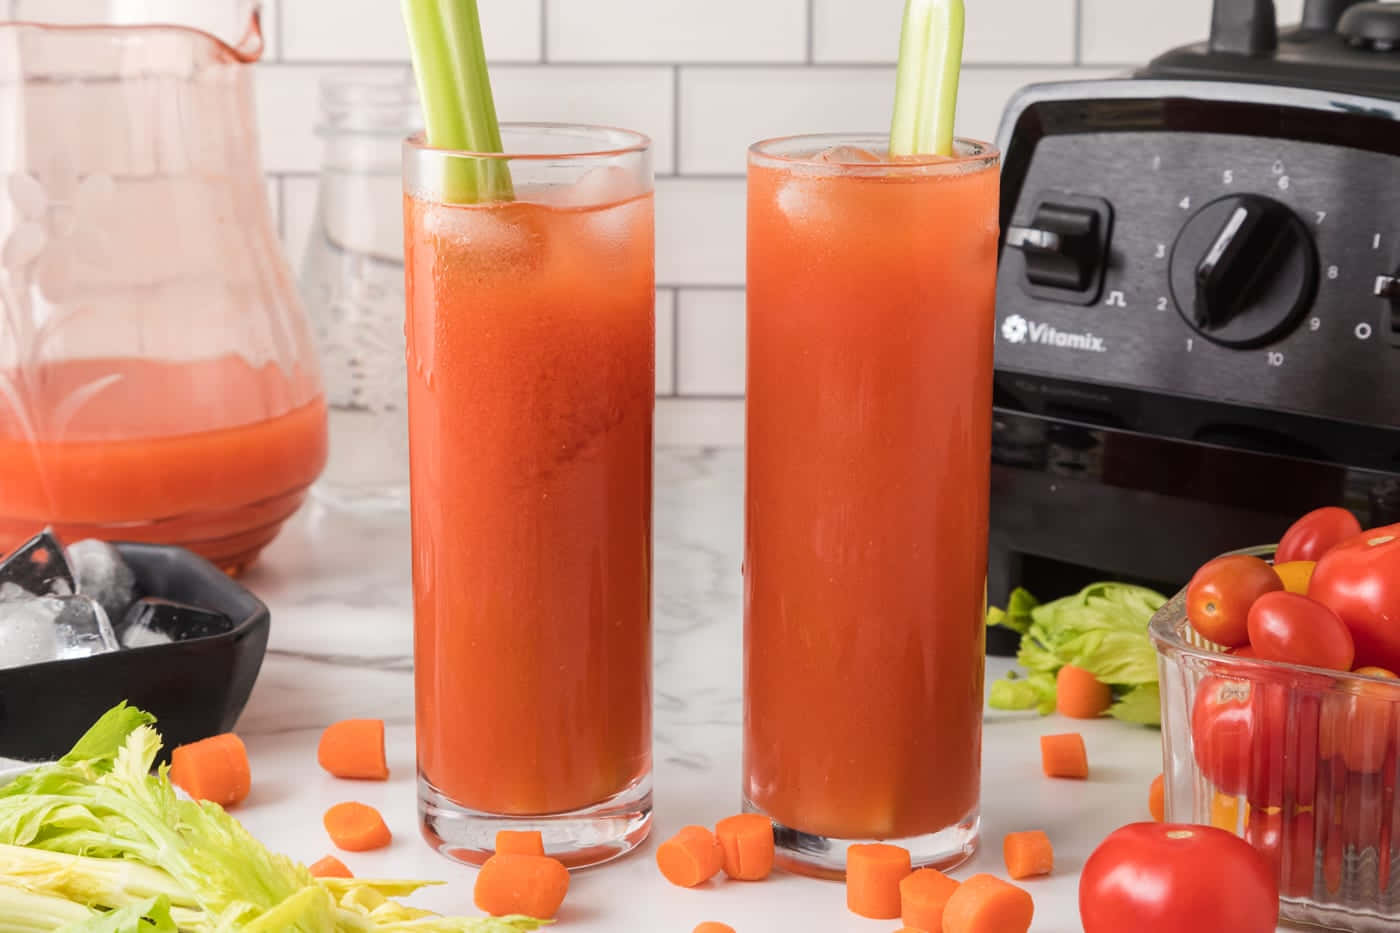 Carrot Juice With Tomatoes And Celery Sticks Wallpaper